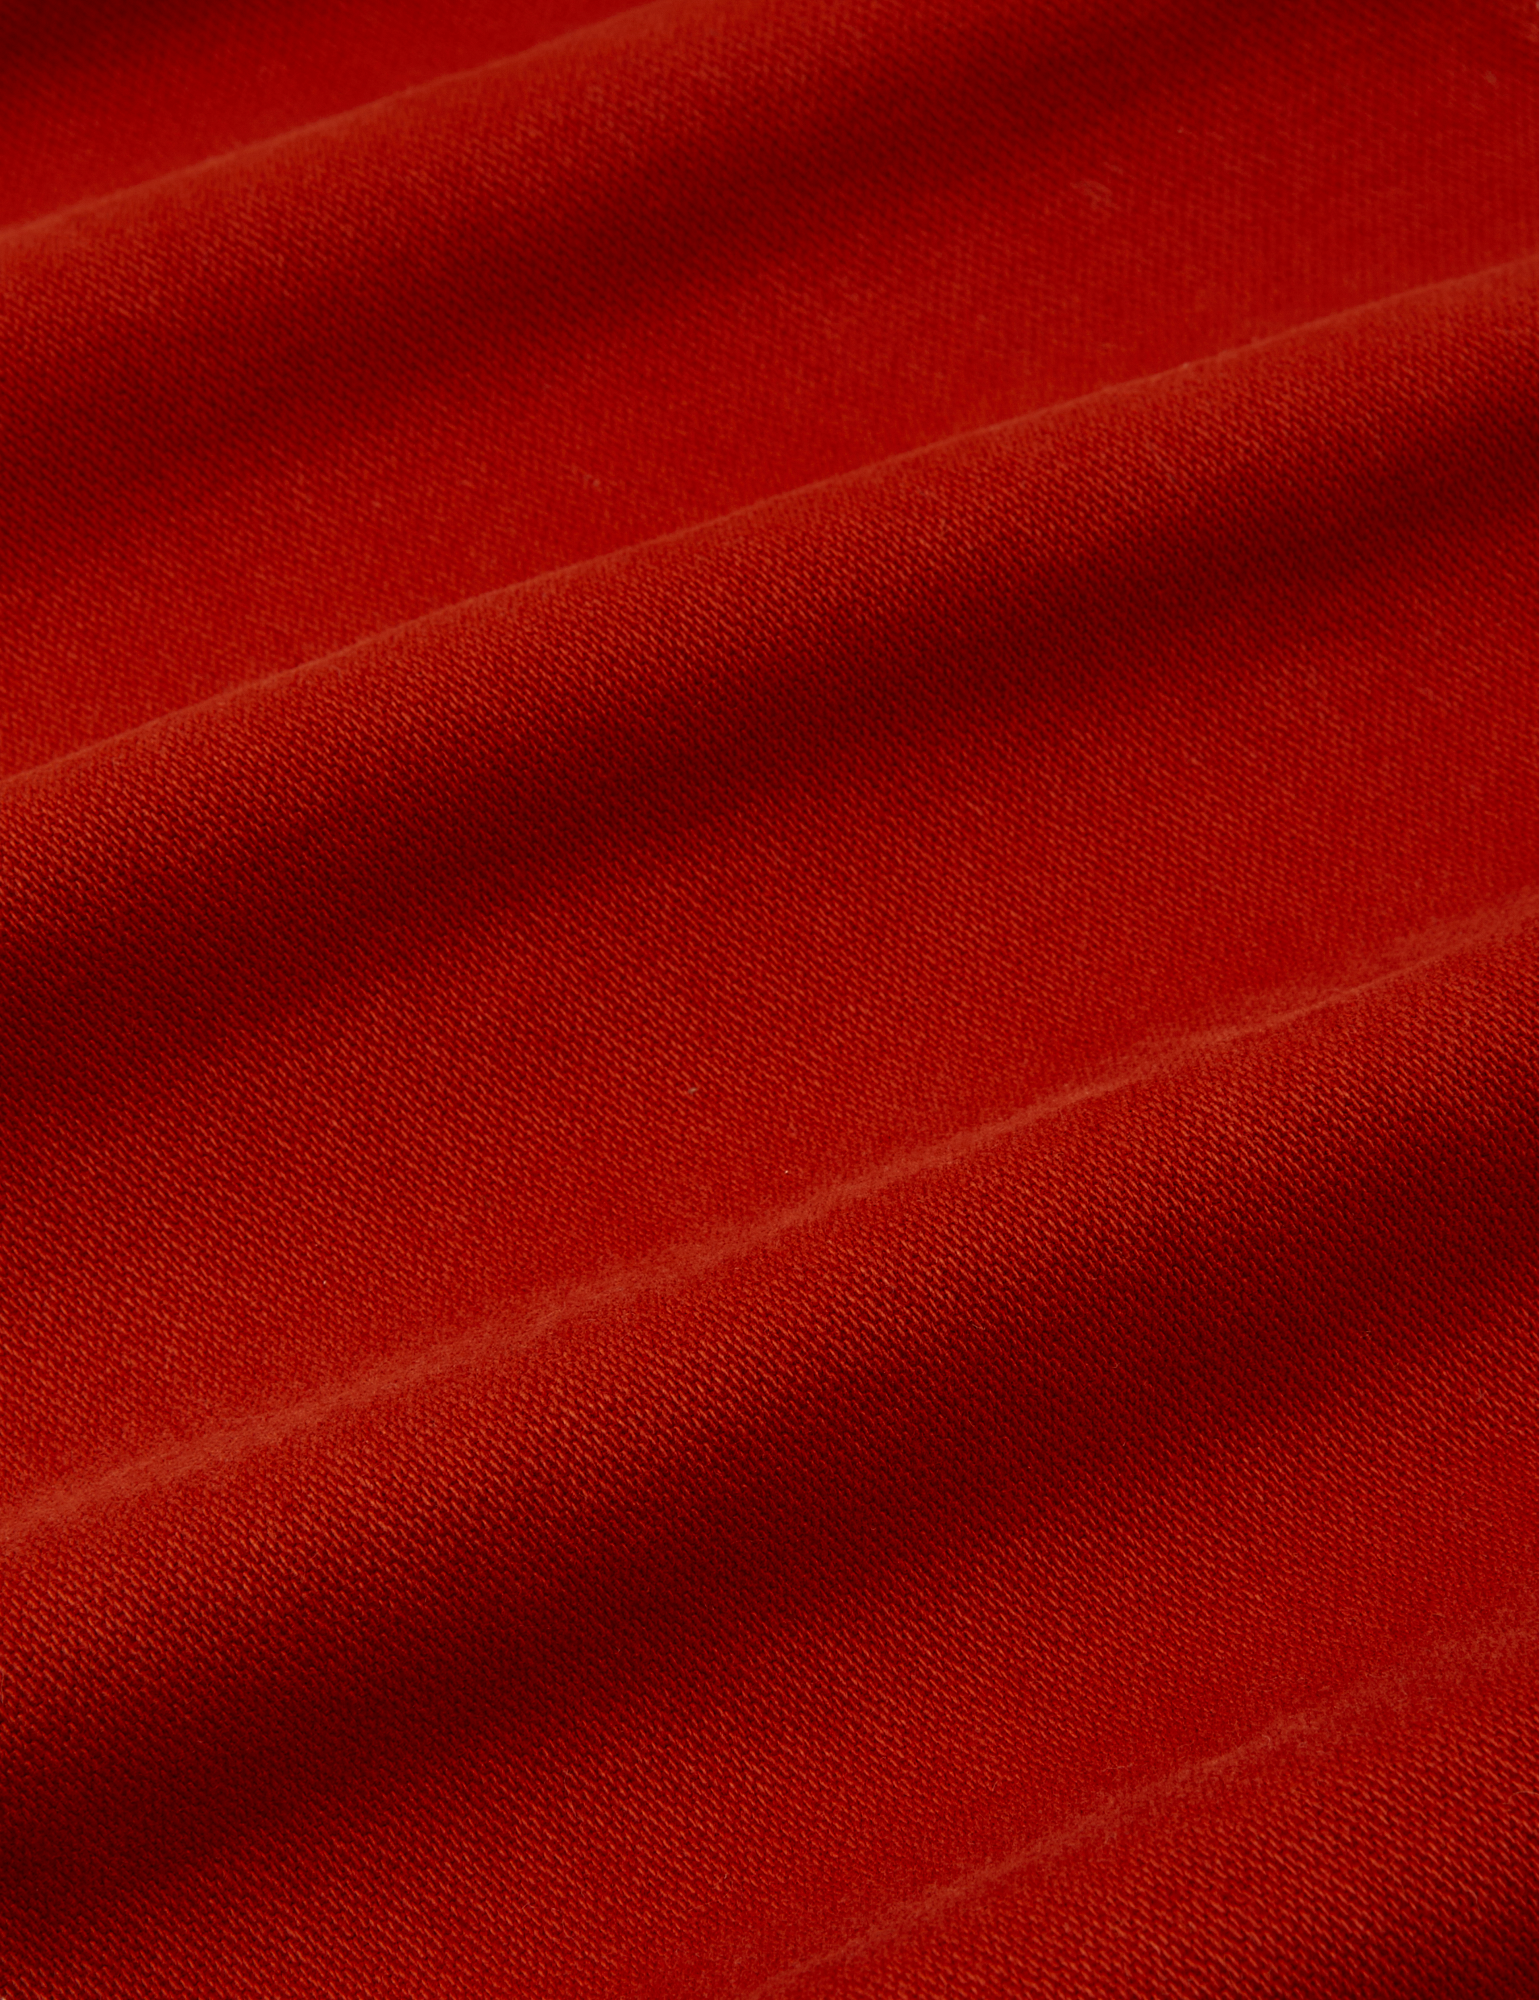 Original Overalls in Paprika fabric detail